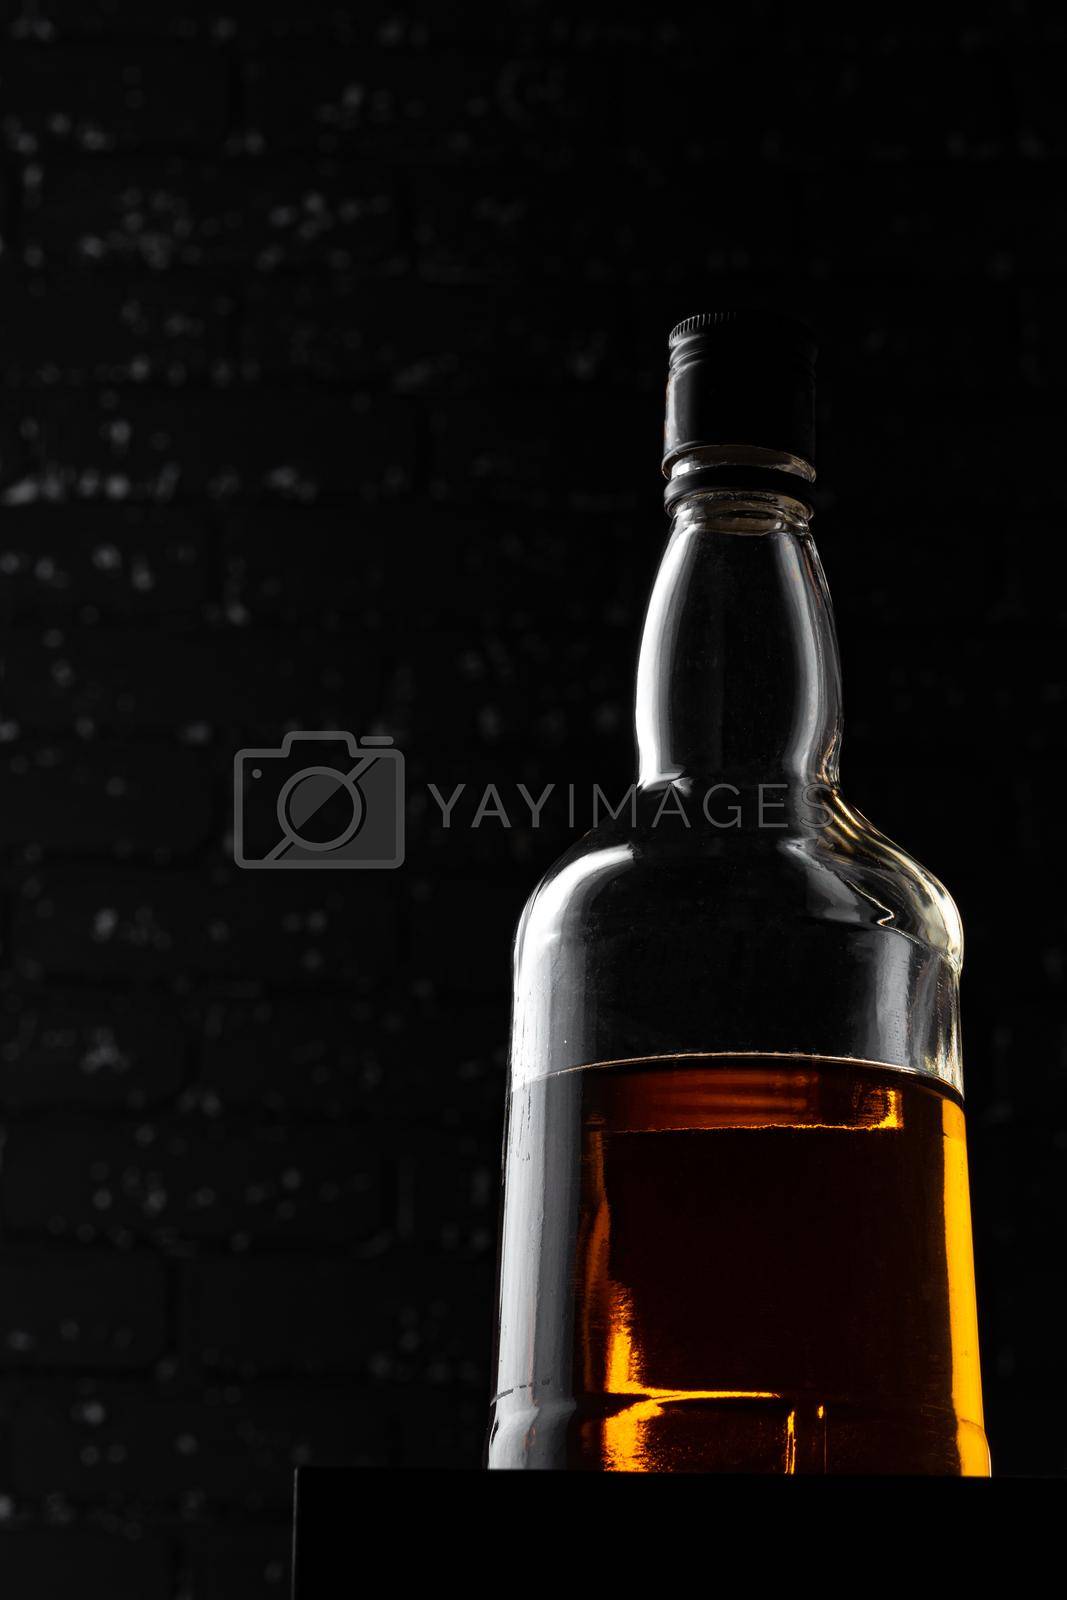 Royalty free image of Whisky bottle close up against black grunge wall by Fabrikasimf